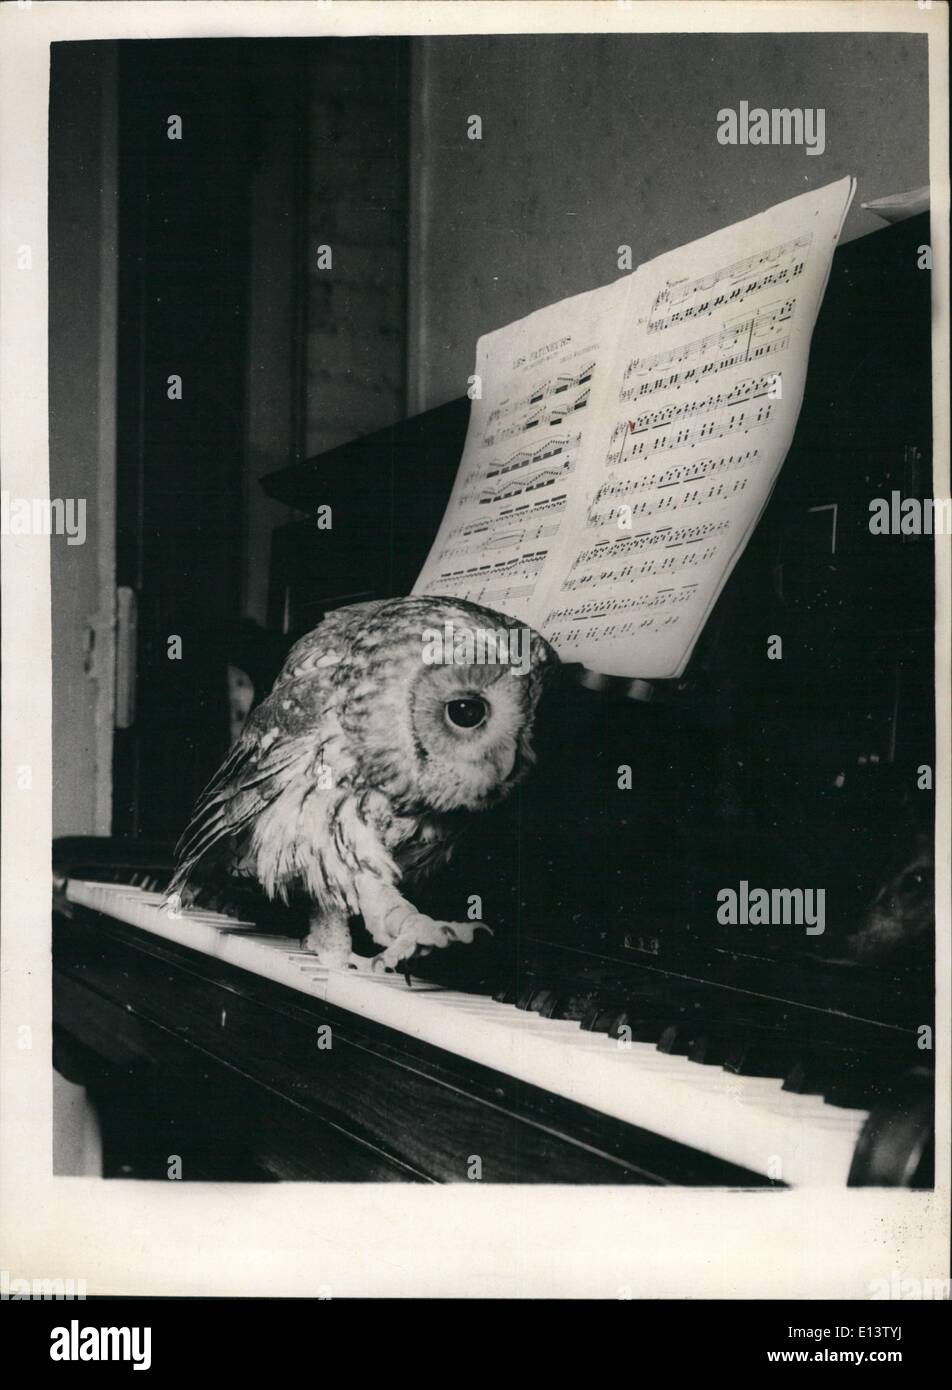 Mar. 27, 2012 - The Owl Who Couldn't Care 'Two Hoots'... He has an 'Ear For...Music'... Strange playmates are George the young tawny owl, and a handsome ginger cat called ''Rin-Tin-Tin'' - owned by young Michael Dean, and who live in Camberley, Surrey. Rin-Tin-Tin lived with Dean family since he was a kitten - but George only joined them last summer when Michael found him - a pathetic ball of feathers - at the bottom of a tree in his garden.. and now the strange couple are great pals.. Keystone Photo Shows:- Up and down the piano keyboard goes George - he has a grand ear for... music. Stock Photo